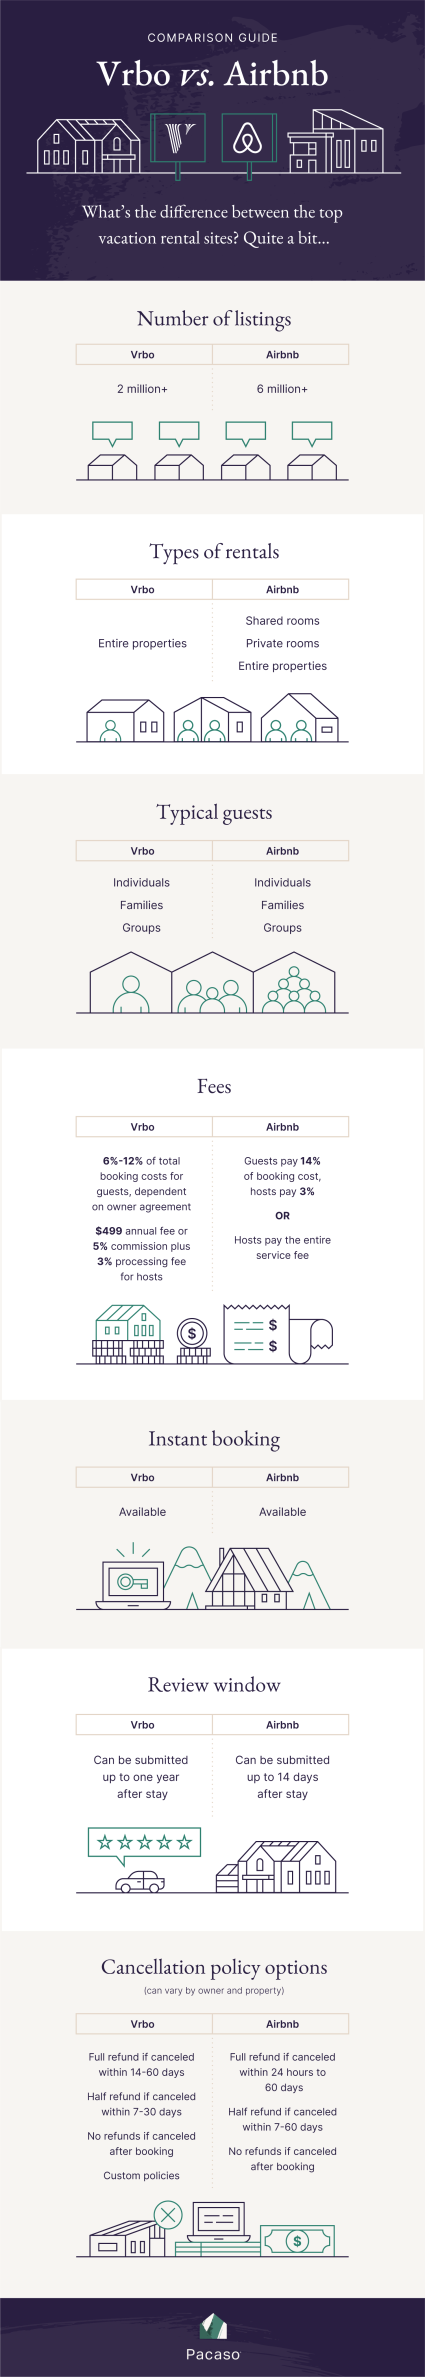 An infographic compares the metrics of Vrbo vs Airbnb so travelers can better determine which platform is right for them. 